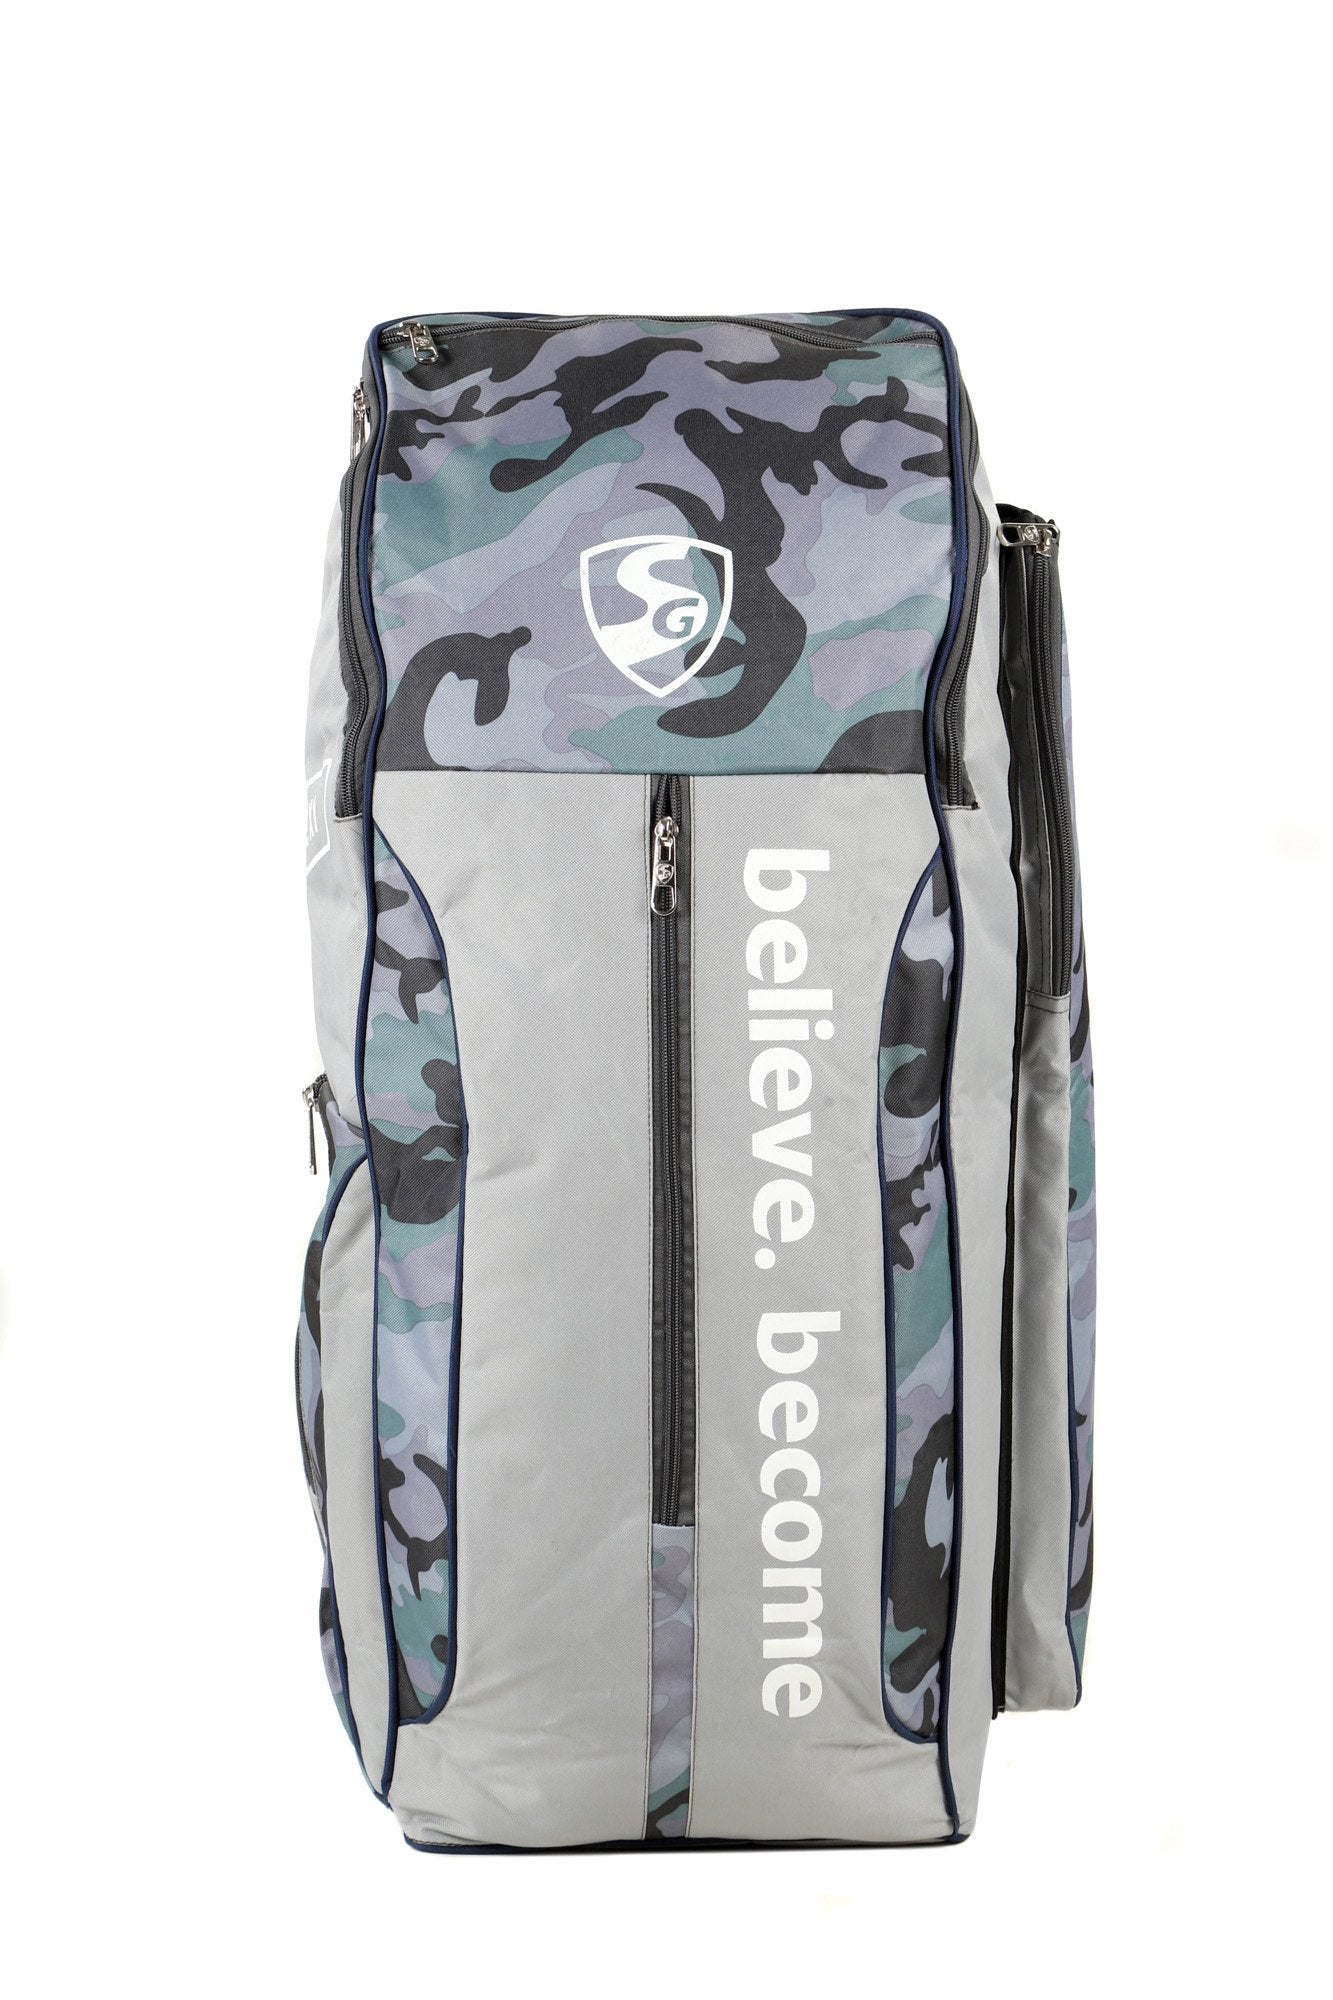 SG Savage® X1 kit bag with shoe compartment camoflouge without wheel